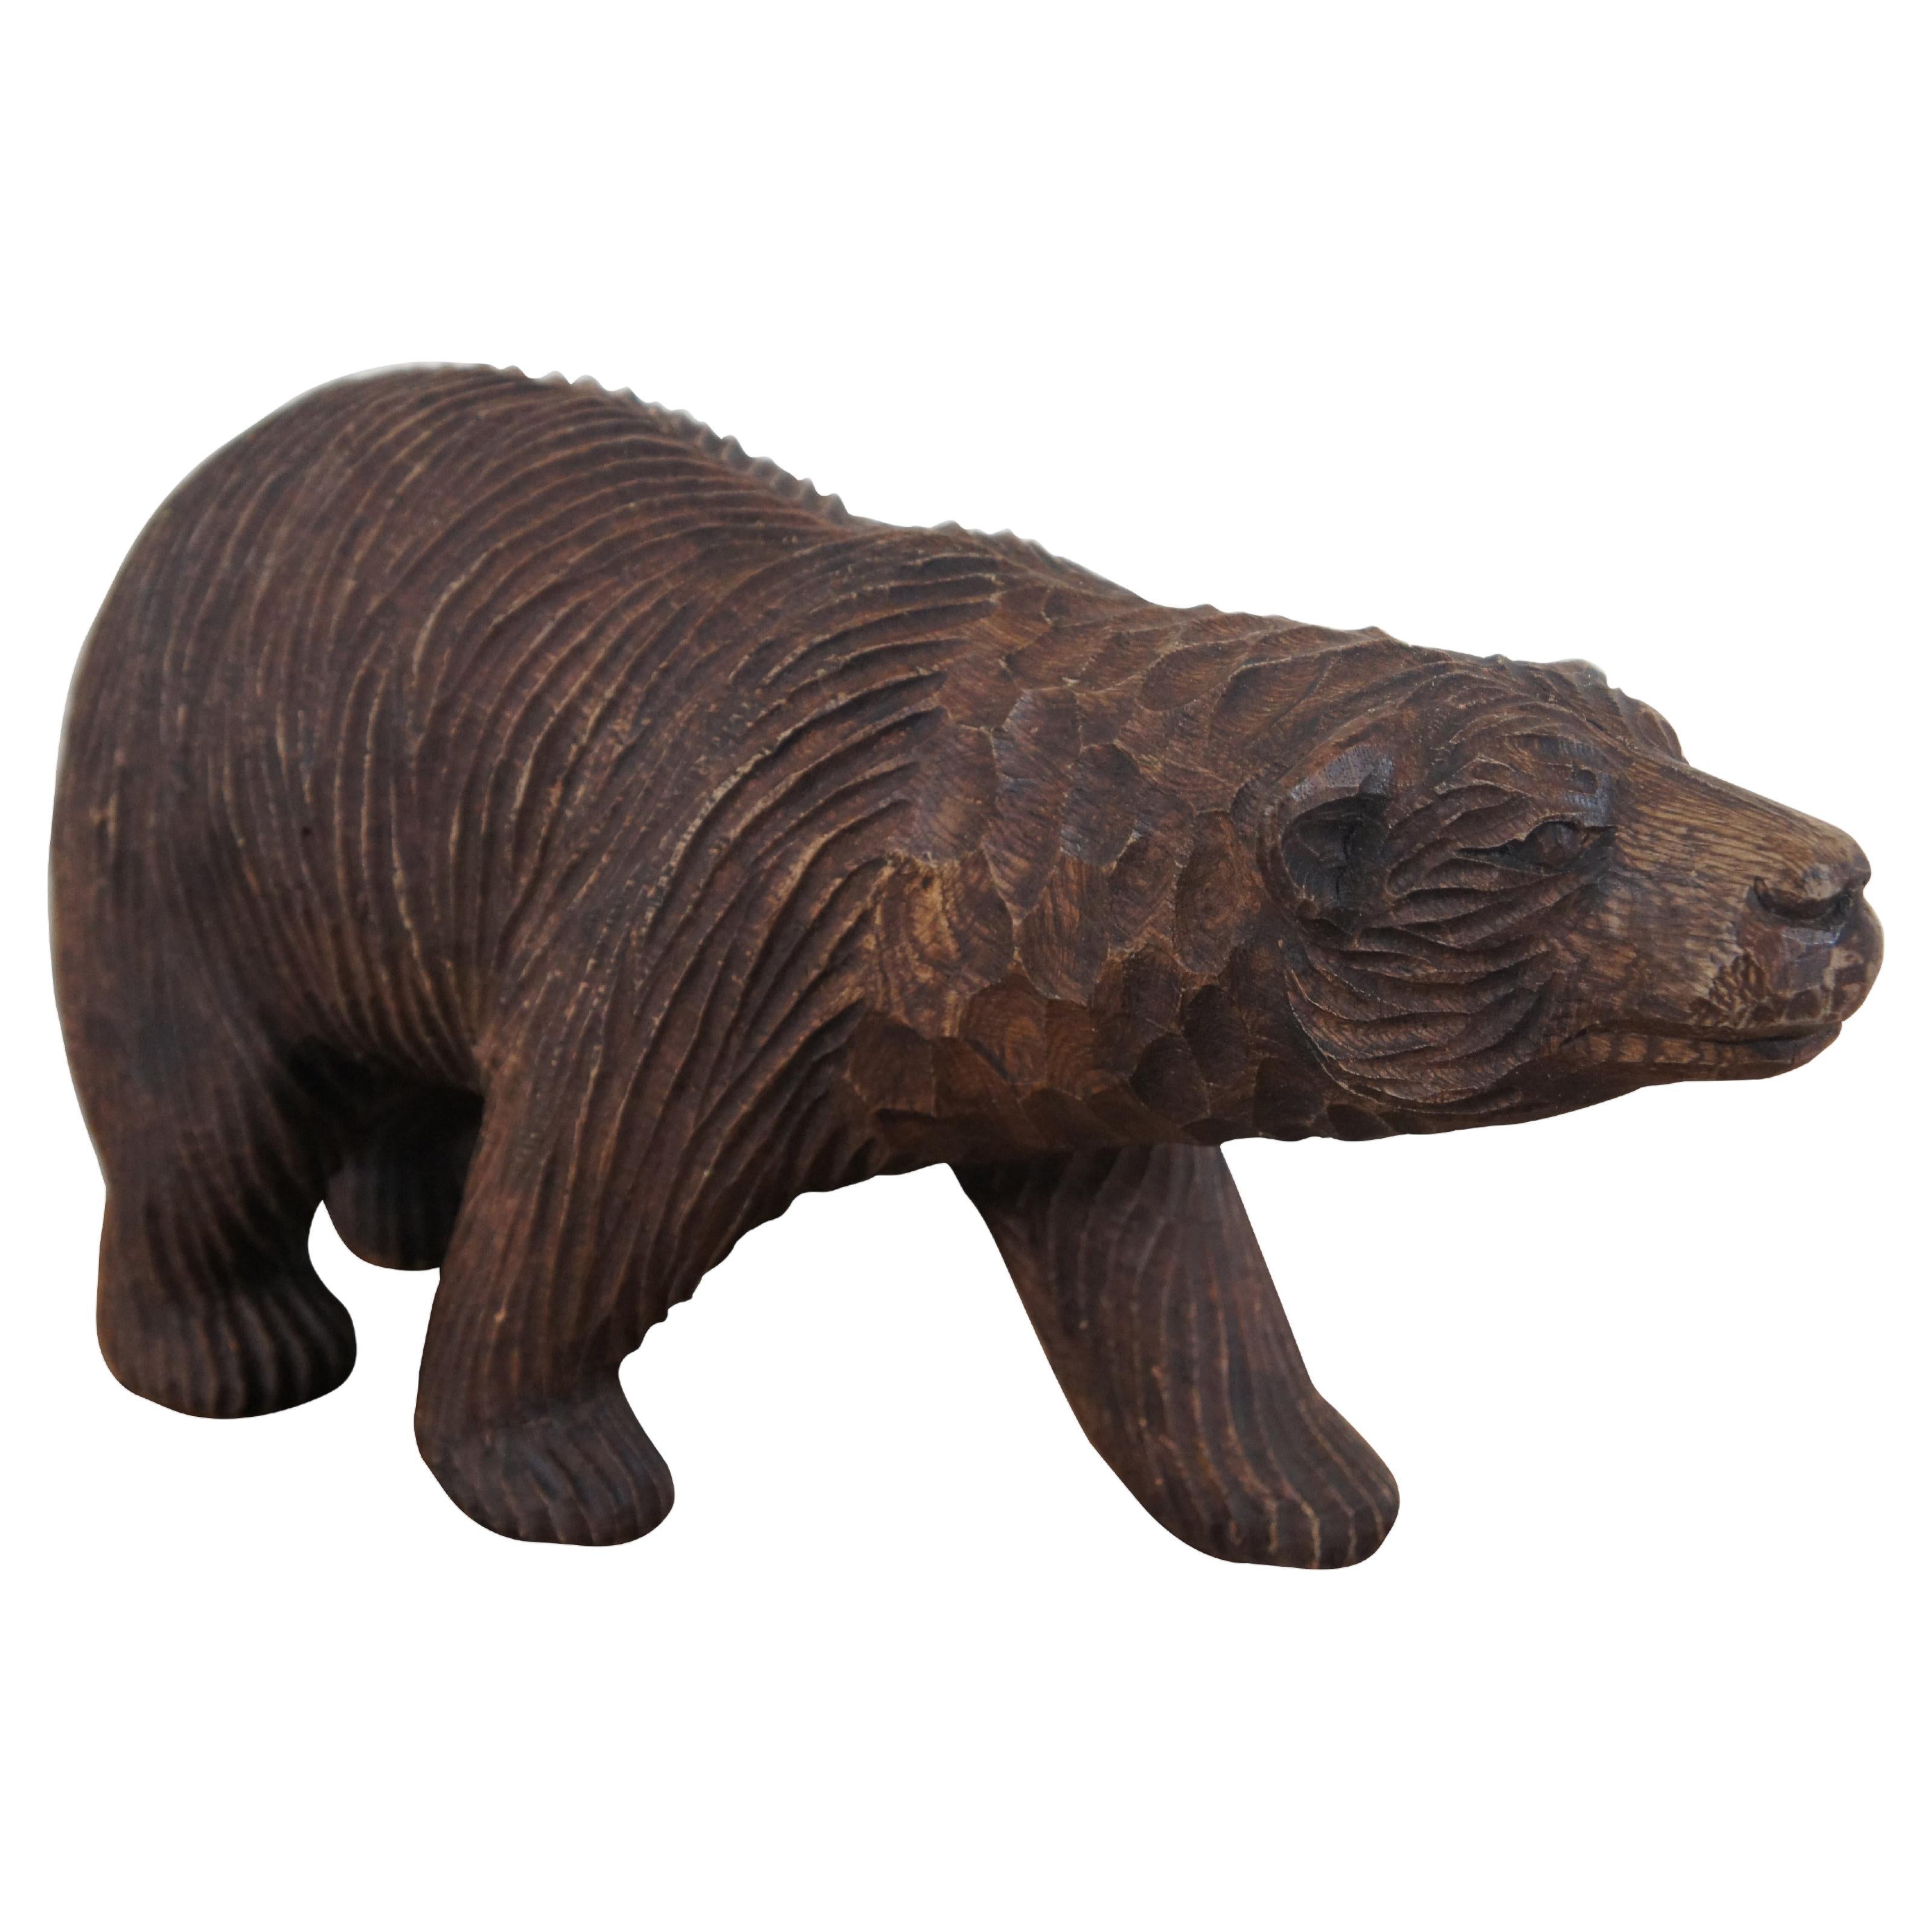 Ironwood Carved Grizzly Bear Sculpture Figurine Rustic Log Cabin Adirondak  For Sale